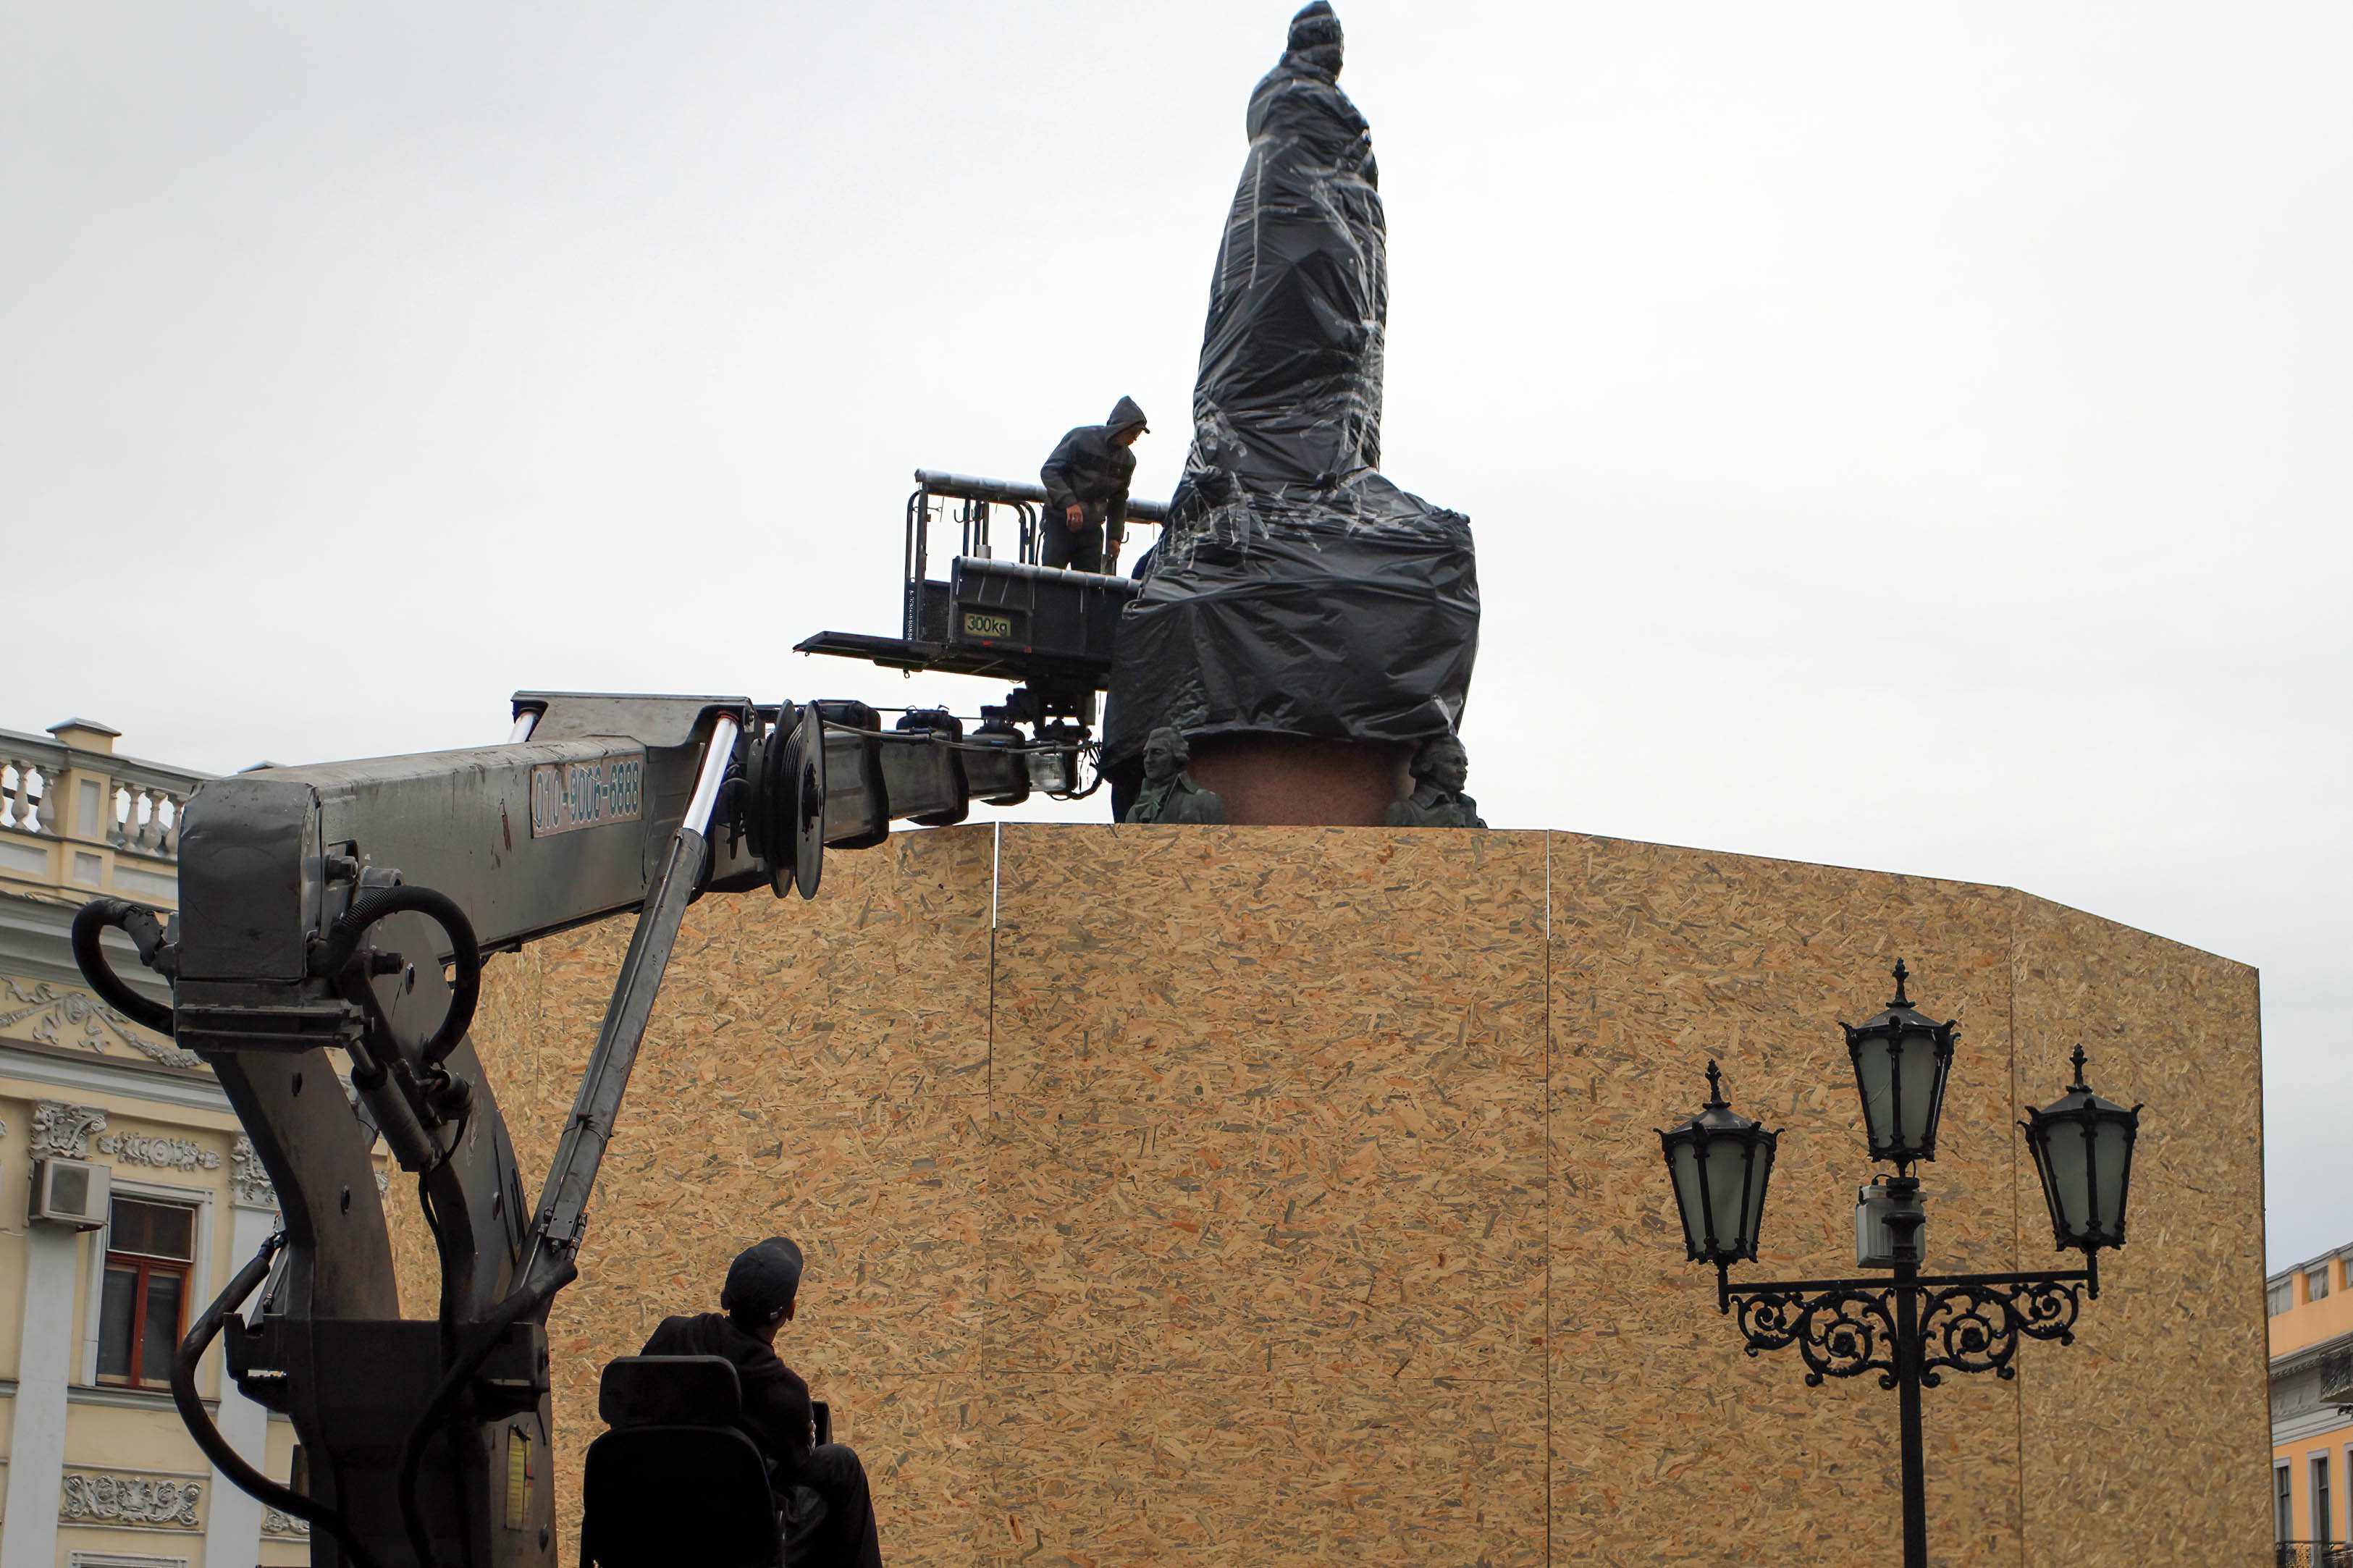 Workers are seen wrapping a monument to Catherine II with